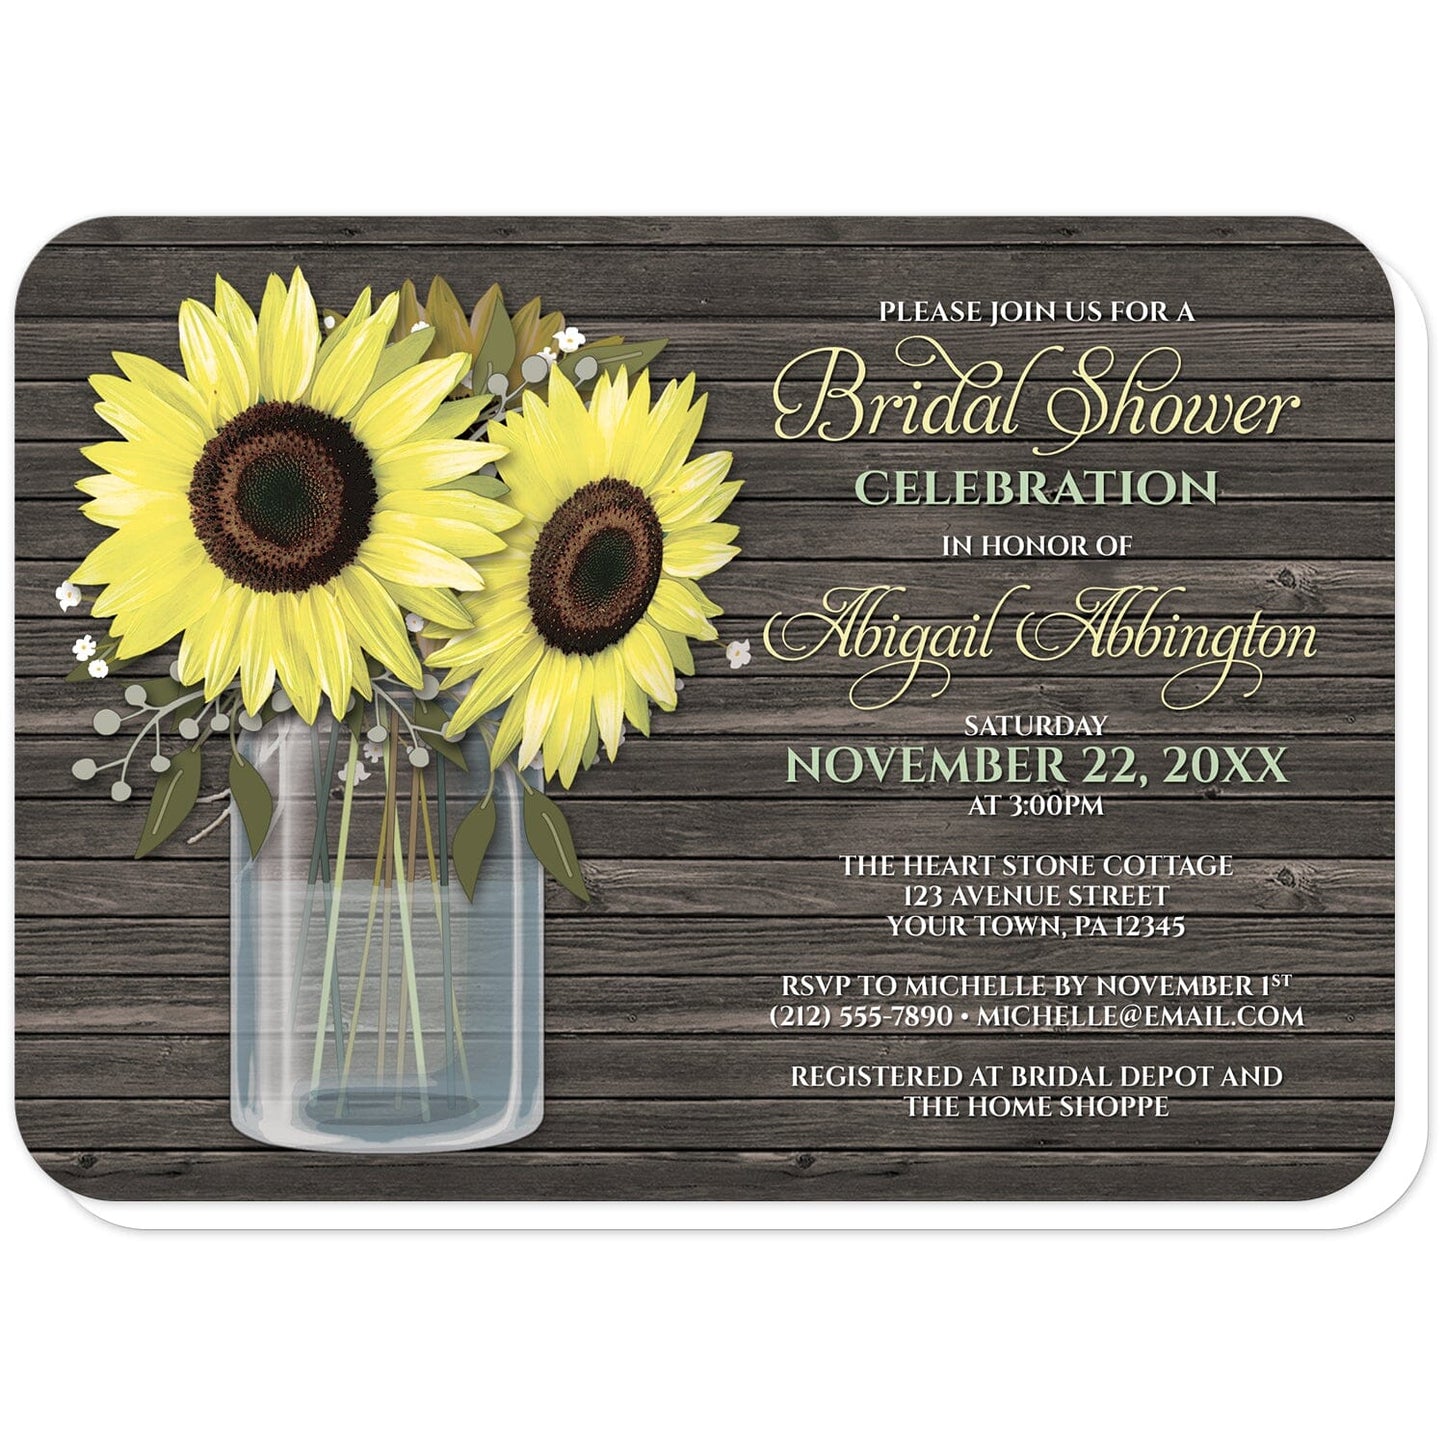 Rustic Sunflower Wood Mason Jar Bridal Shower Invitations (with rounded corners)  at Artistically Invited. Southern country-inspired rustic sunflower wood mason jar bridal shower invitations with big yellow sunflowers, small accents of baby's breath, and green leaves in a glass mason jar illustration. Your personalized bridal shower celebration details are custom printed in white, yellow, and light green to the right of the sunflowers and mason jar design over a dark brown wood background.